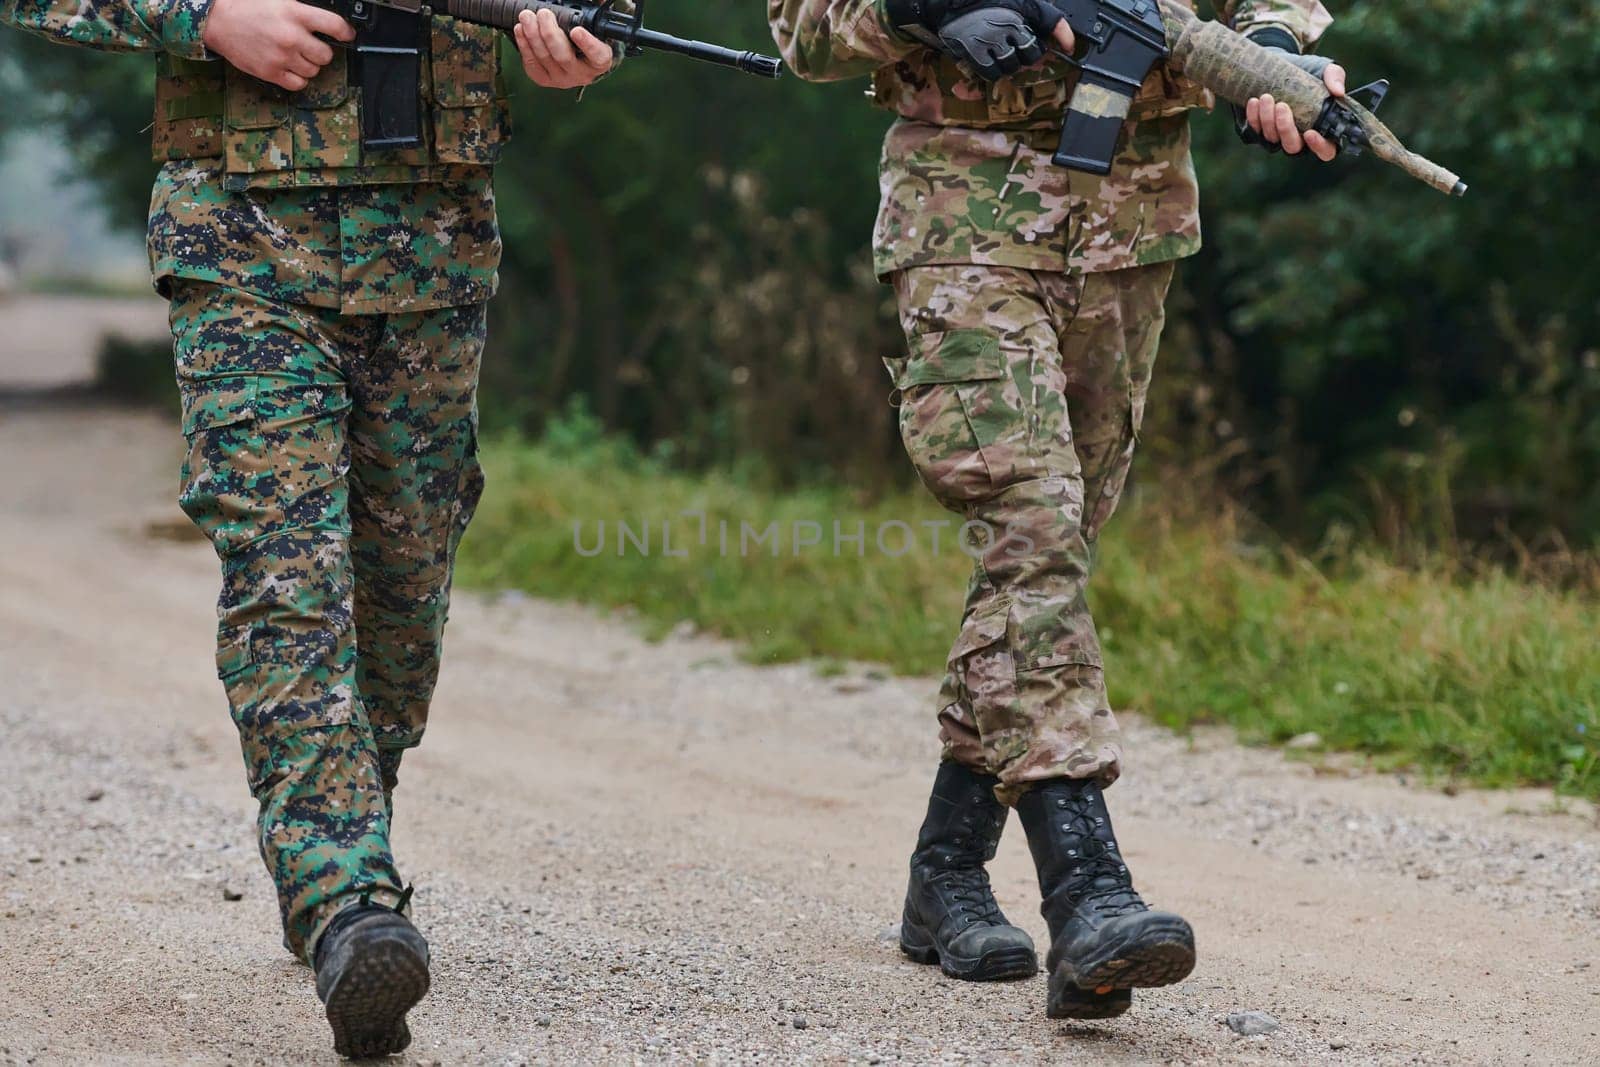 Close up photo, the resilient legs of elite soldiers, clad in camouflage boots, stride purposefully along a hazardous forest path as they embark on a high-stakes military mission.